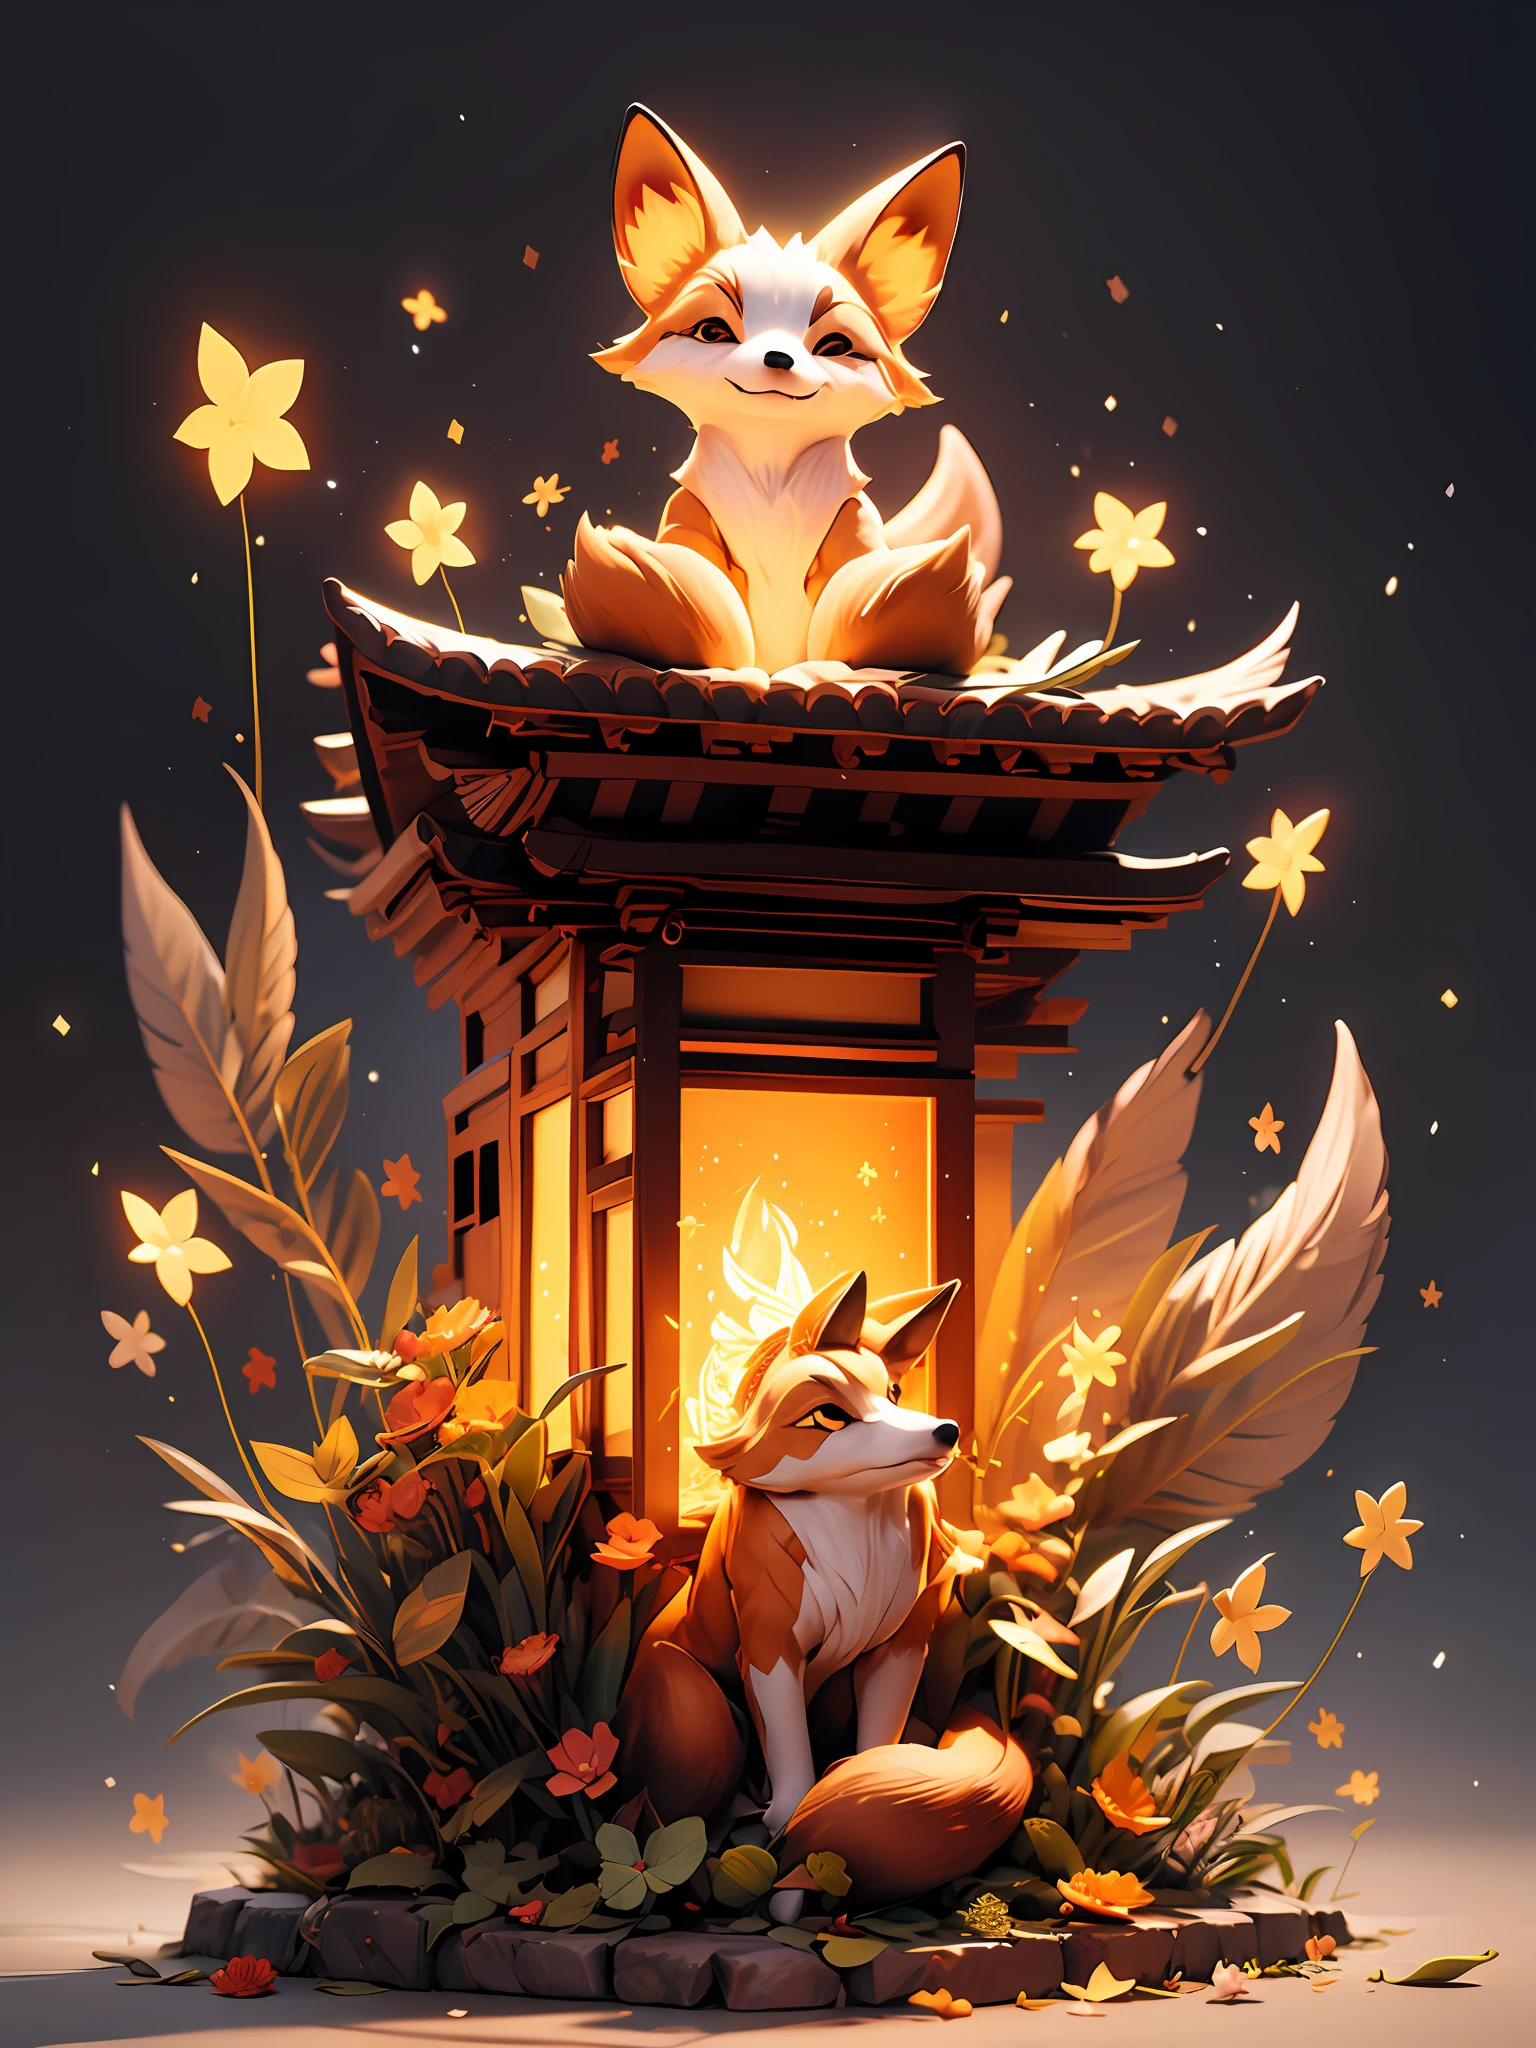 "Enchanting night scene with a Japanese Temple a captivating glowing fox surrounded by mesmerizing light particles and a stunning light effect. No humans present."